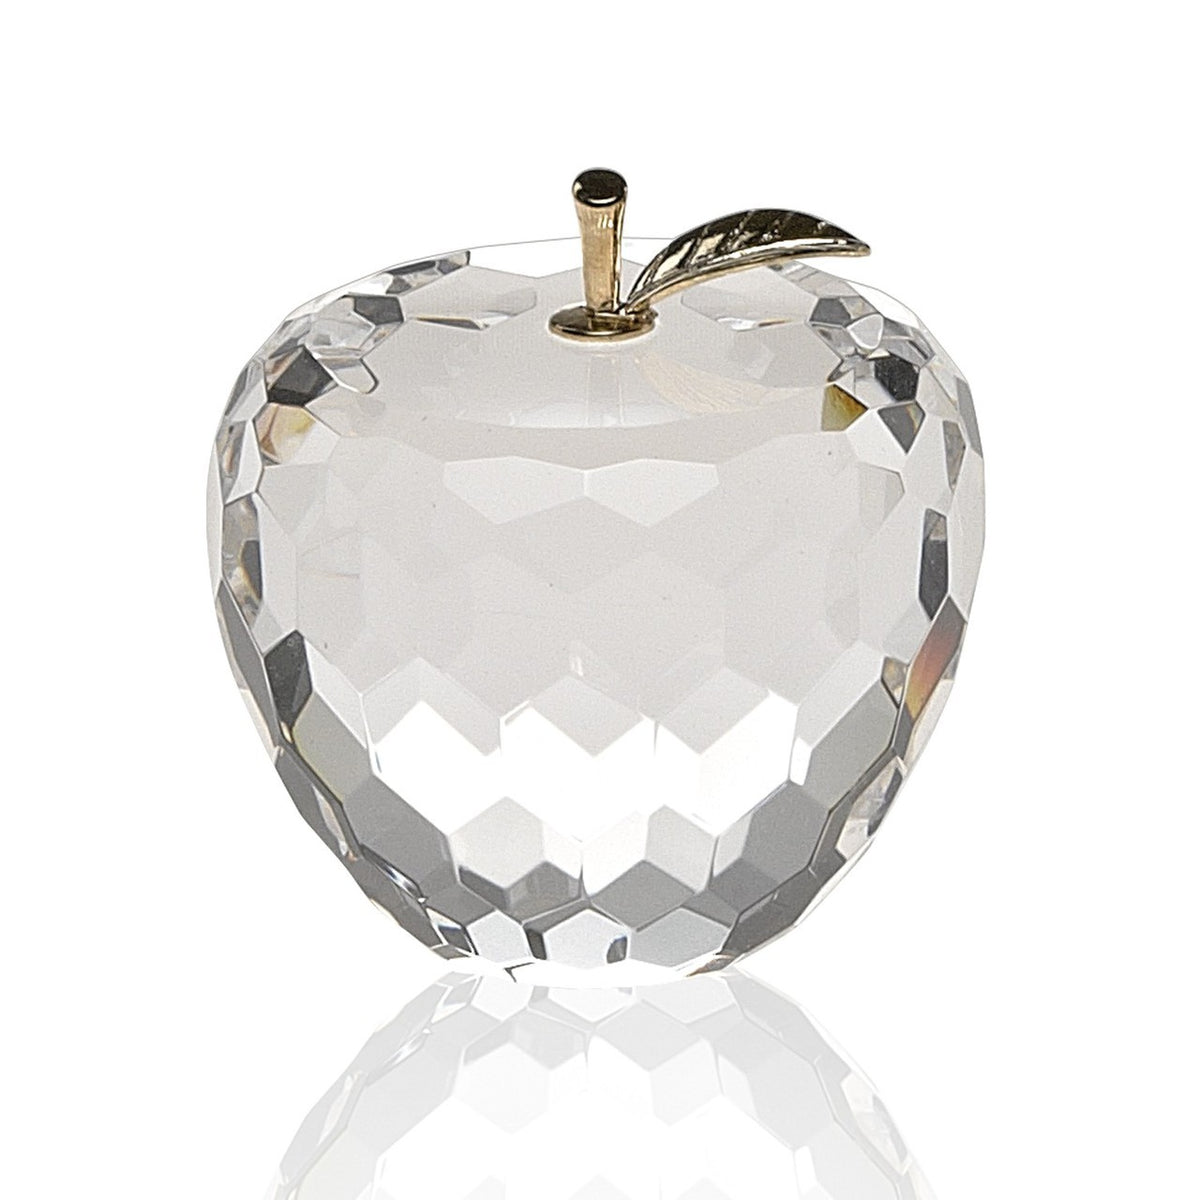 Faceted Apple Paperweight gold stem